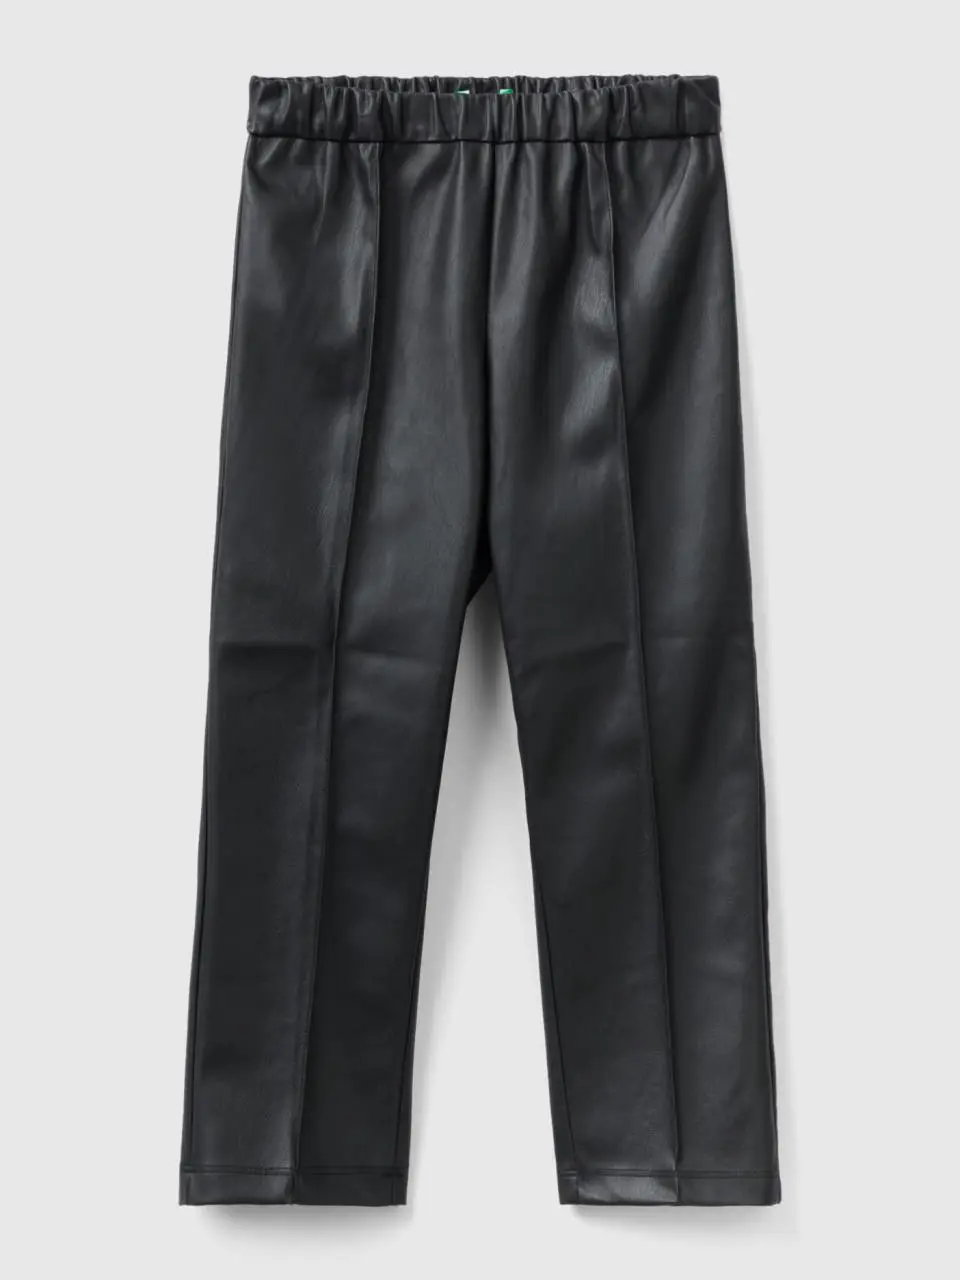 Benetton slim fit trousers in imitation leather fabric. 1